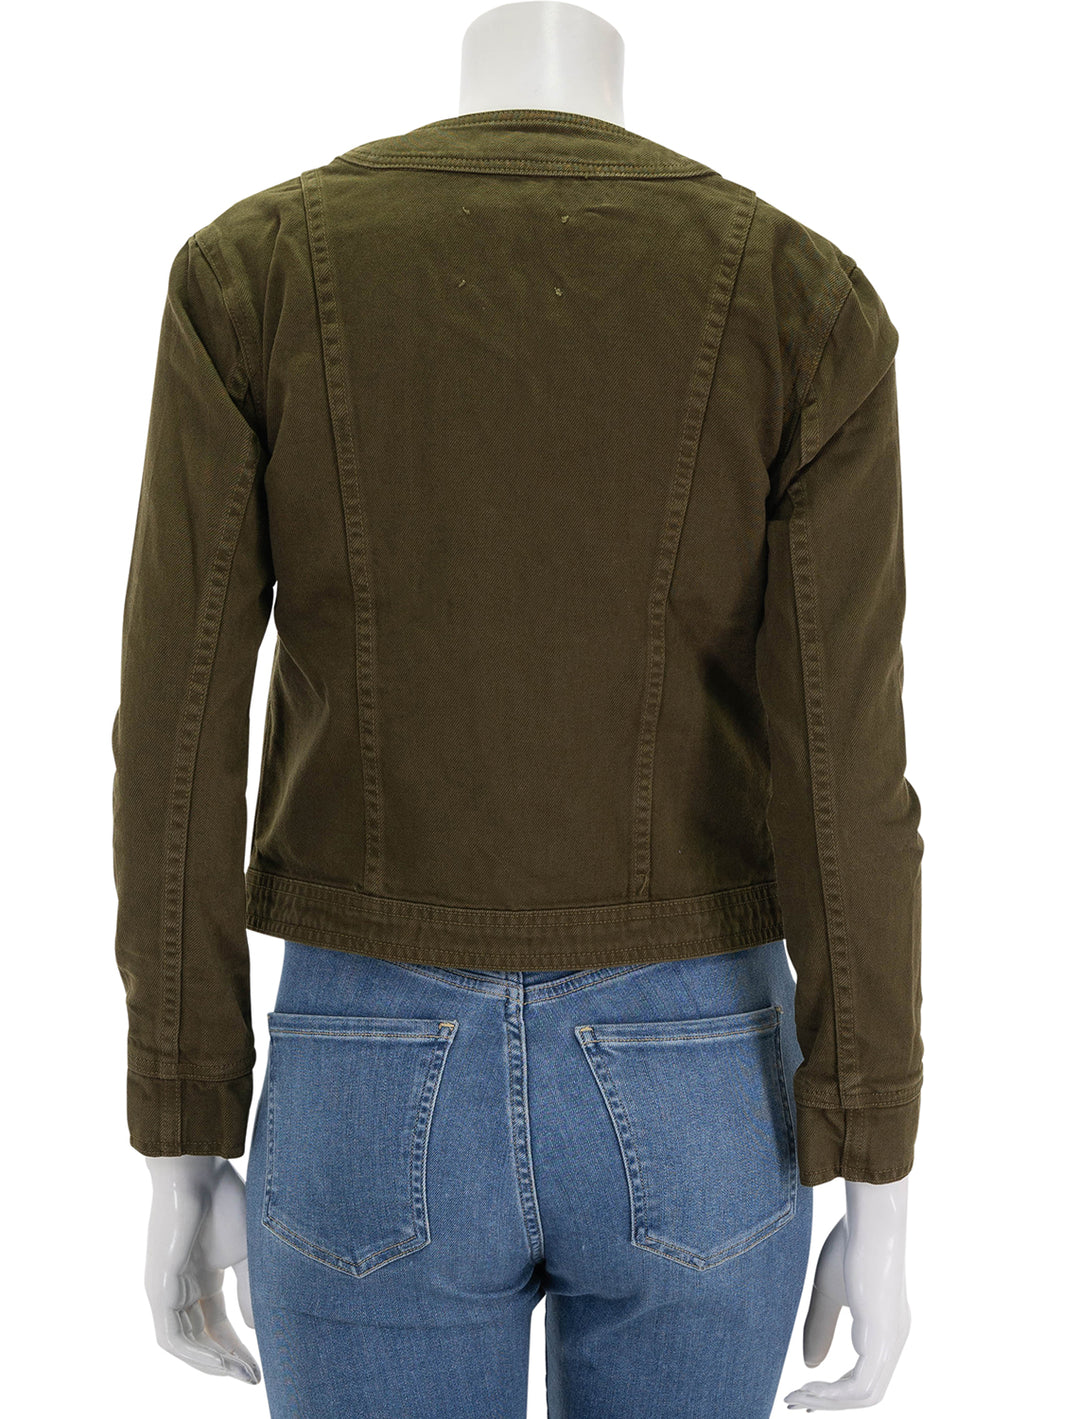 Back view of L'Agence's yari collarless jacket in olive grove.